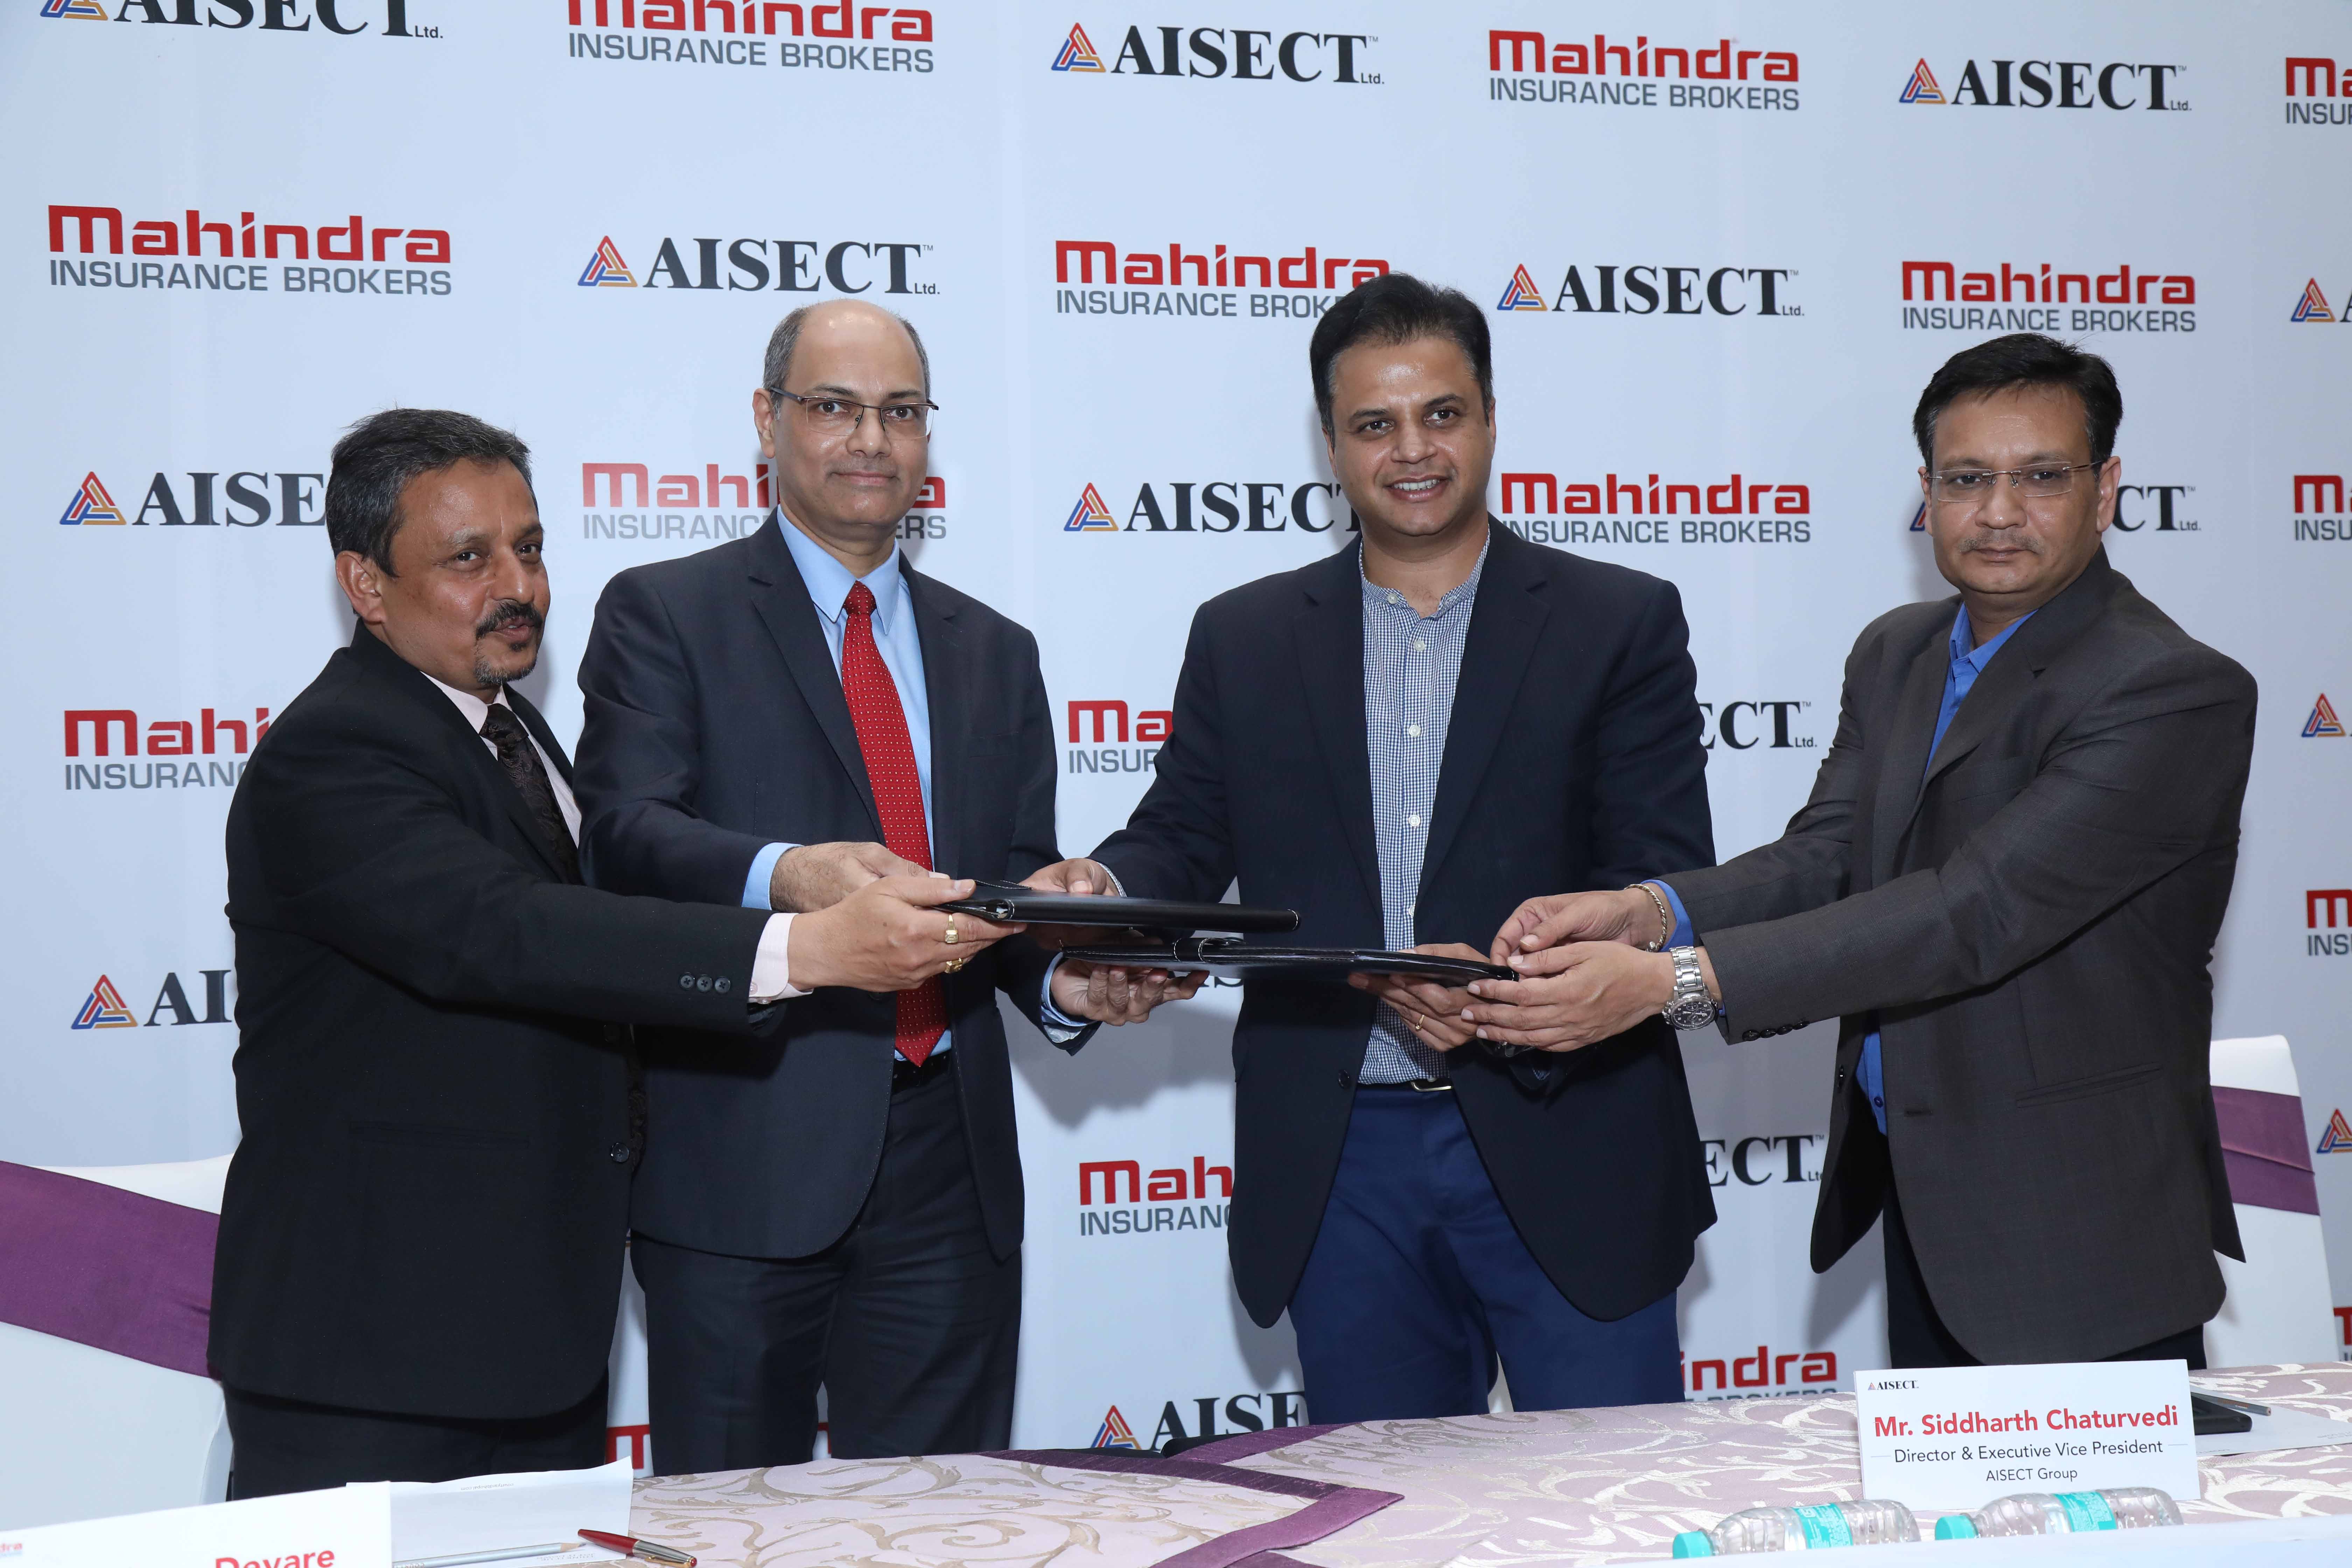 Mahindra Insurance alliances with AISECT for customized health insurance solutions